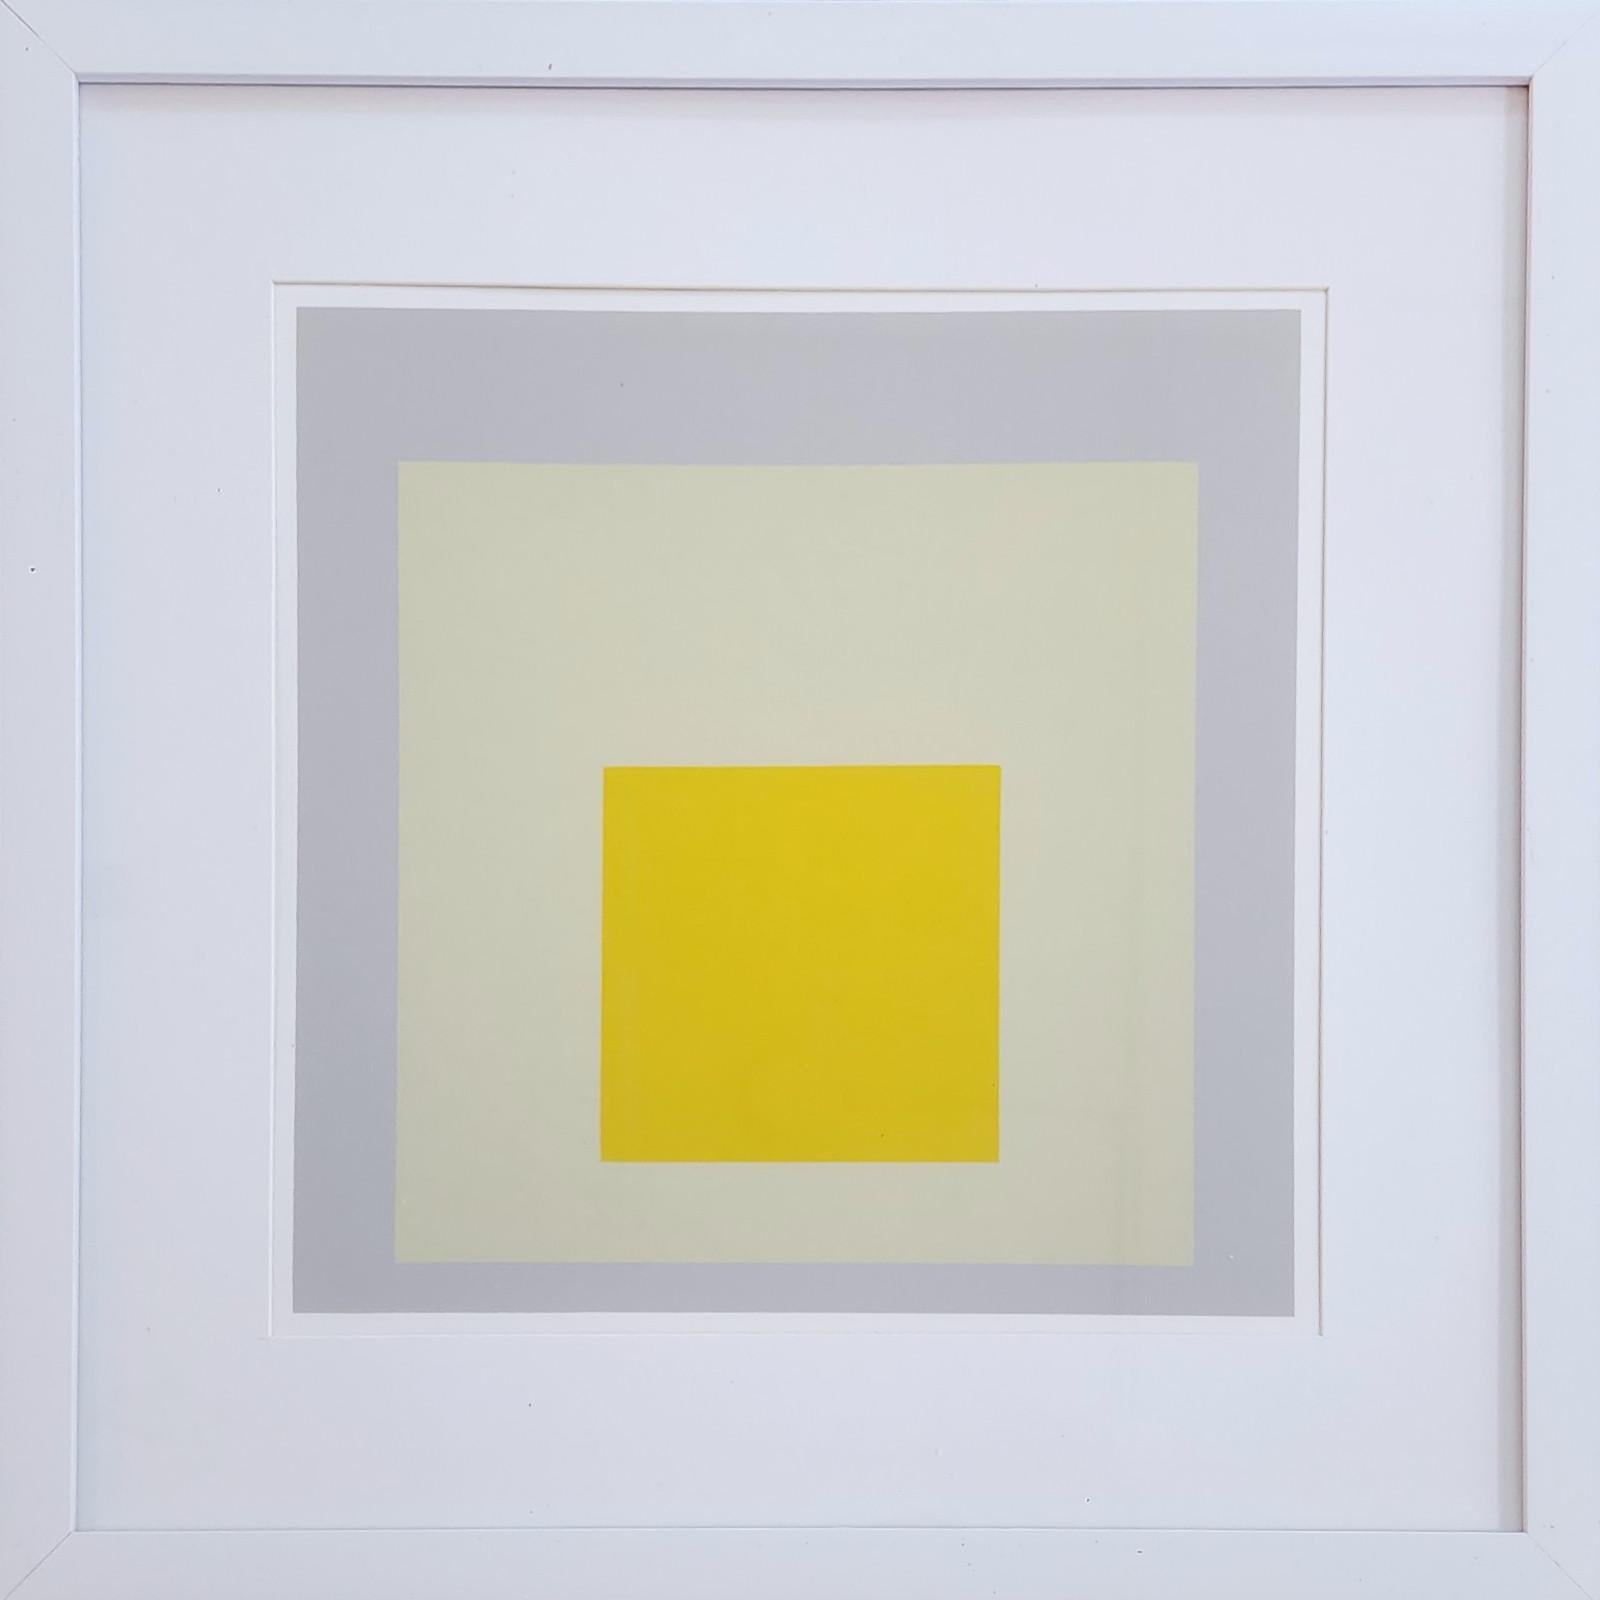 Homage to the Square: Impact (Bauhaus, Minimalism, 50% OFF LIST PRICE) - Minimalist Print by (after) Josef Albers